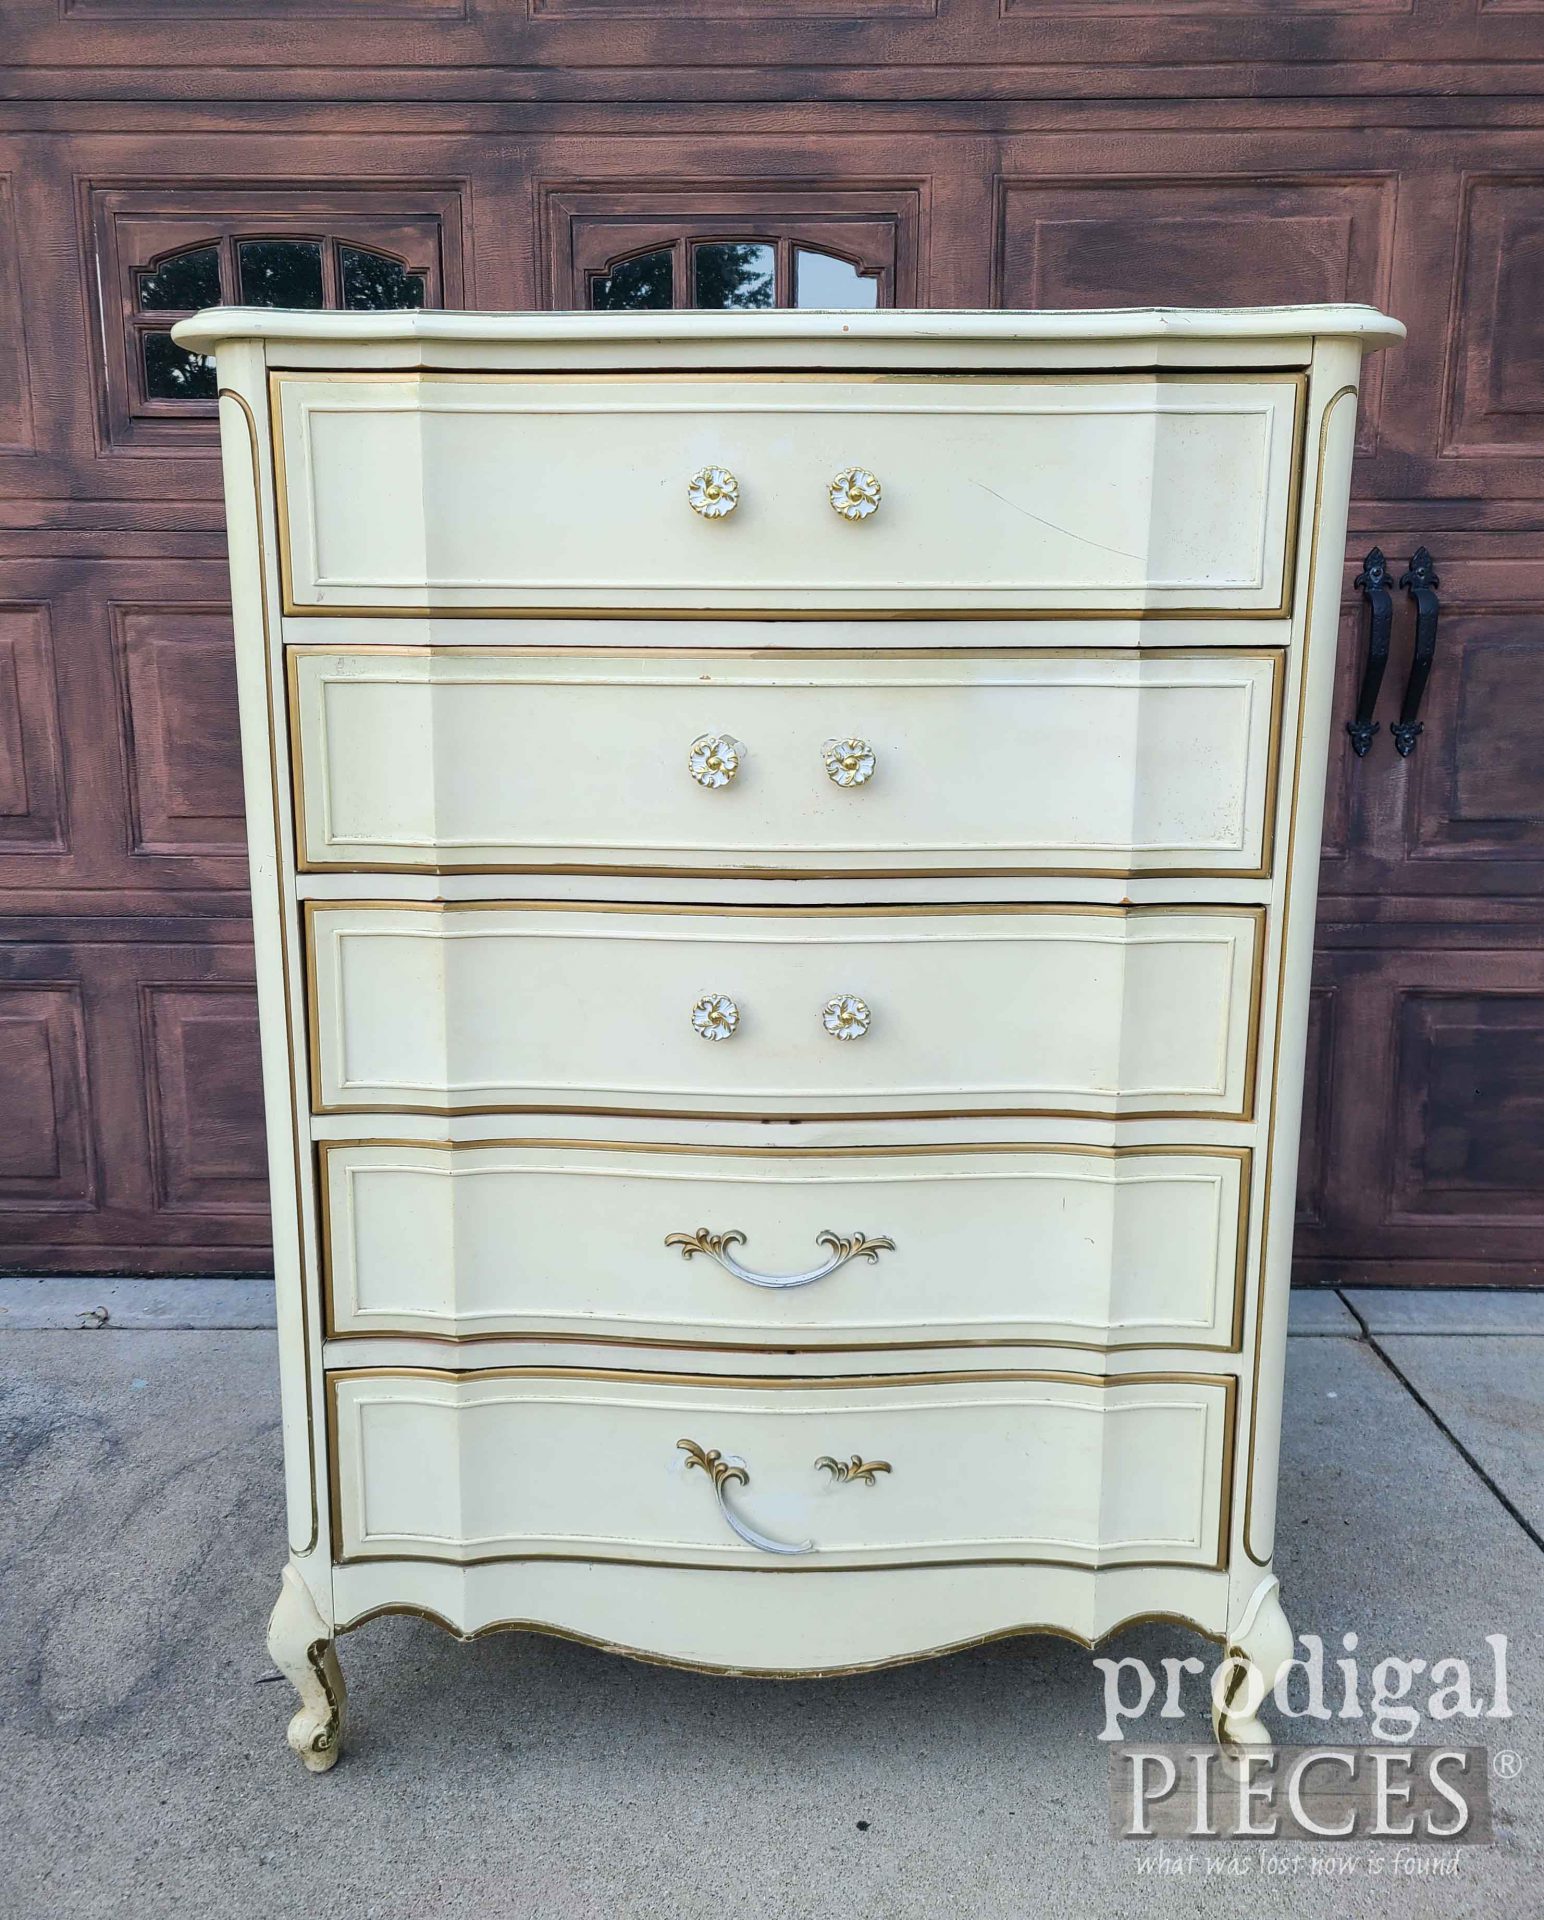 Vintage French Provincial Chest Before Makeover by Larissa of Prodigal Pieces | prodigalpieces.com #prodigalpieces